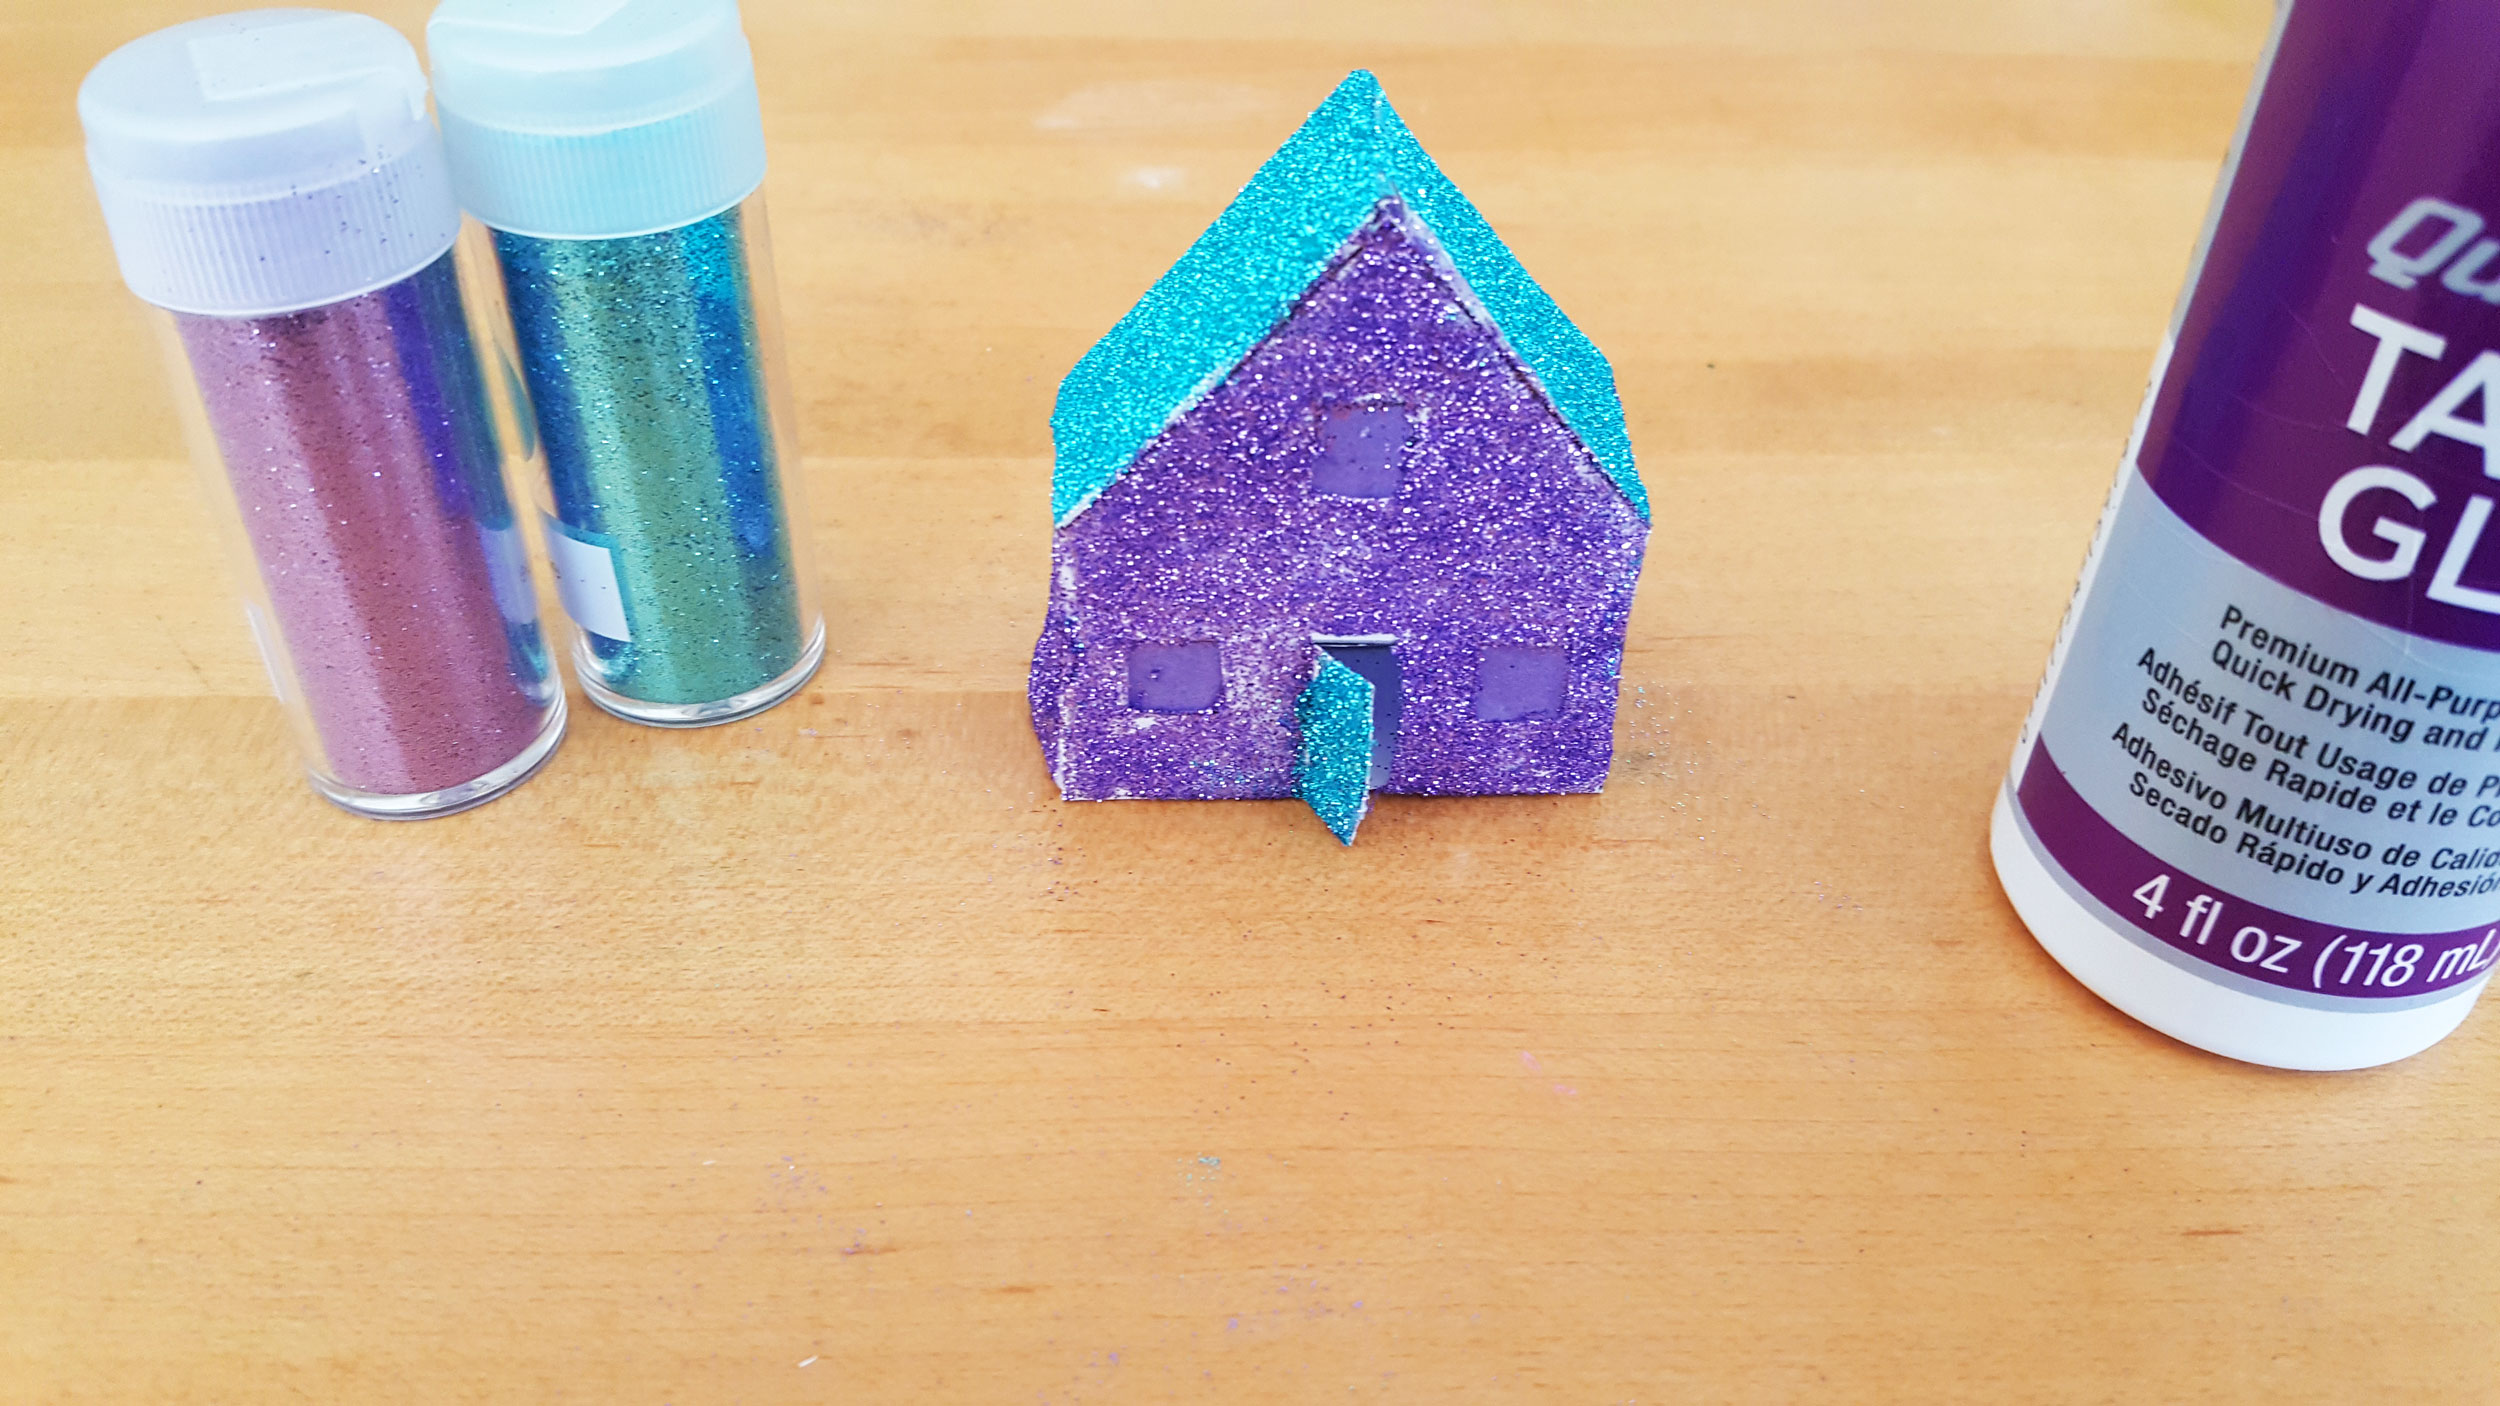 Add glue and glitters to outside of Paper House Ornament | OrnamentShop.com